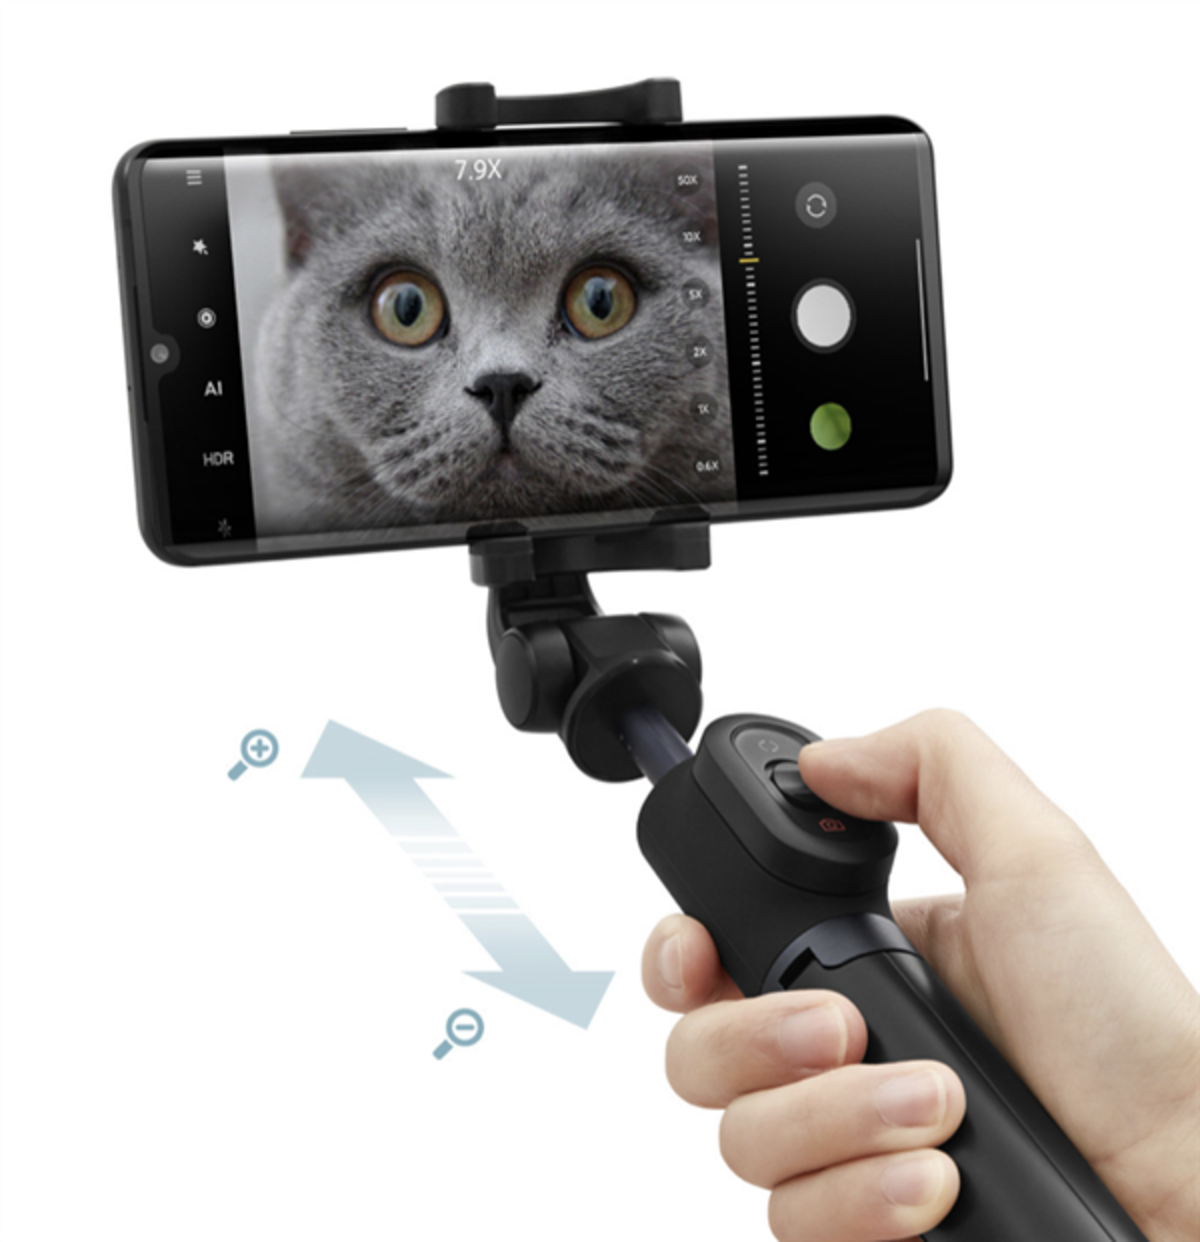 So we can control the zoom of the photos from the new Xiaomi selfie stick